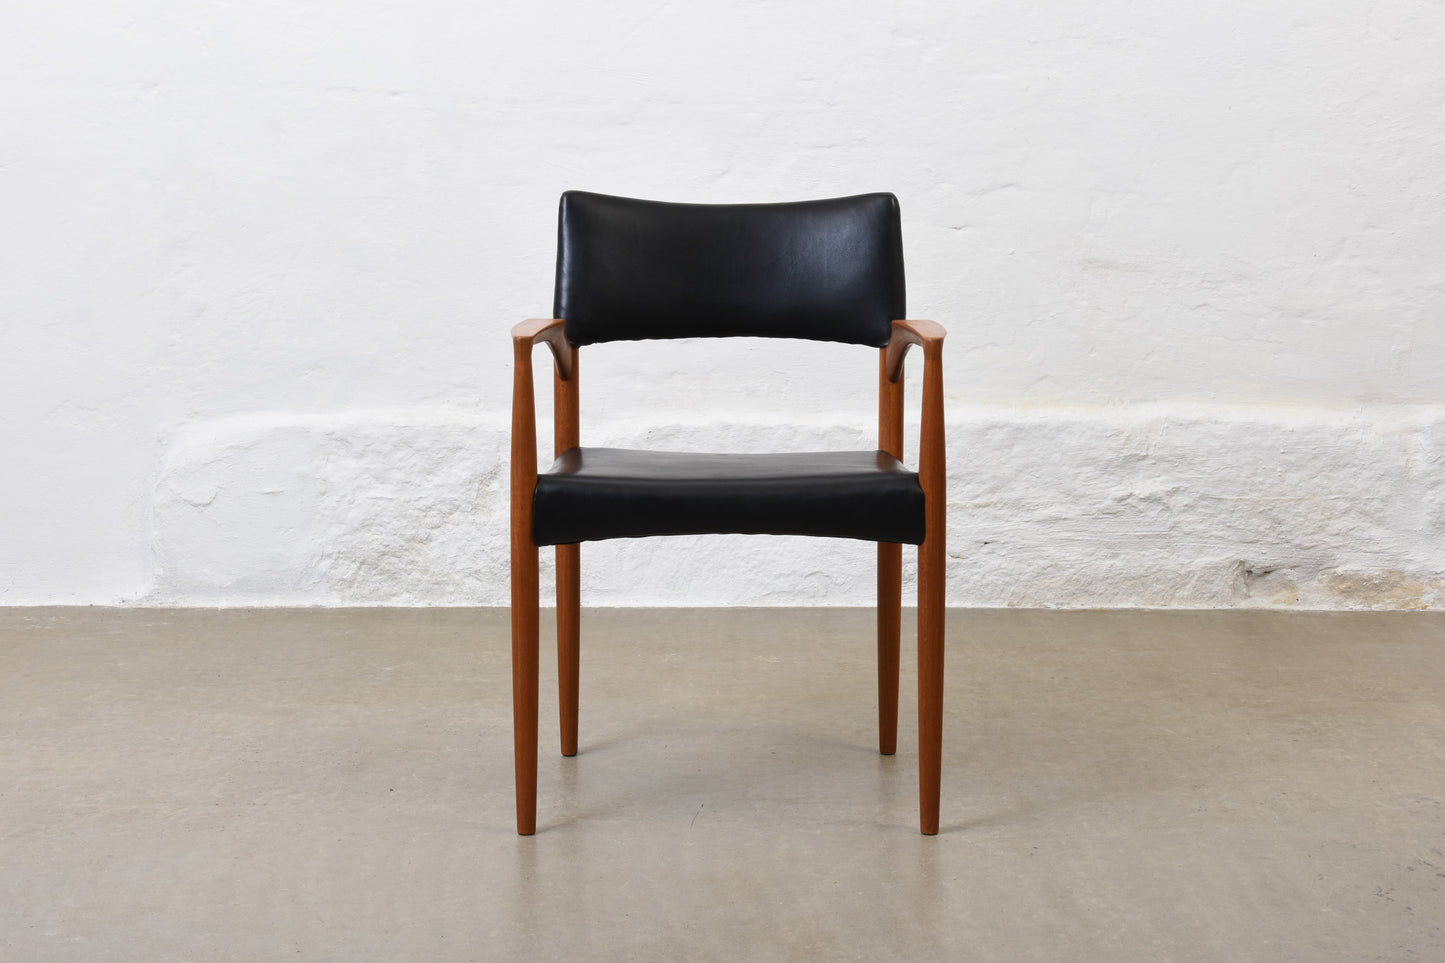 Newly reupholstered: Teak + leather armchair by Willy Schou Andersen